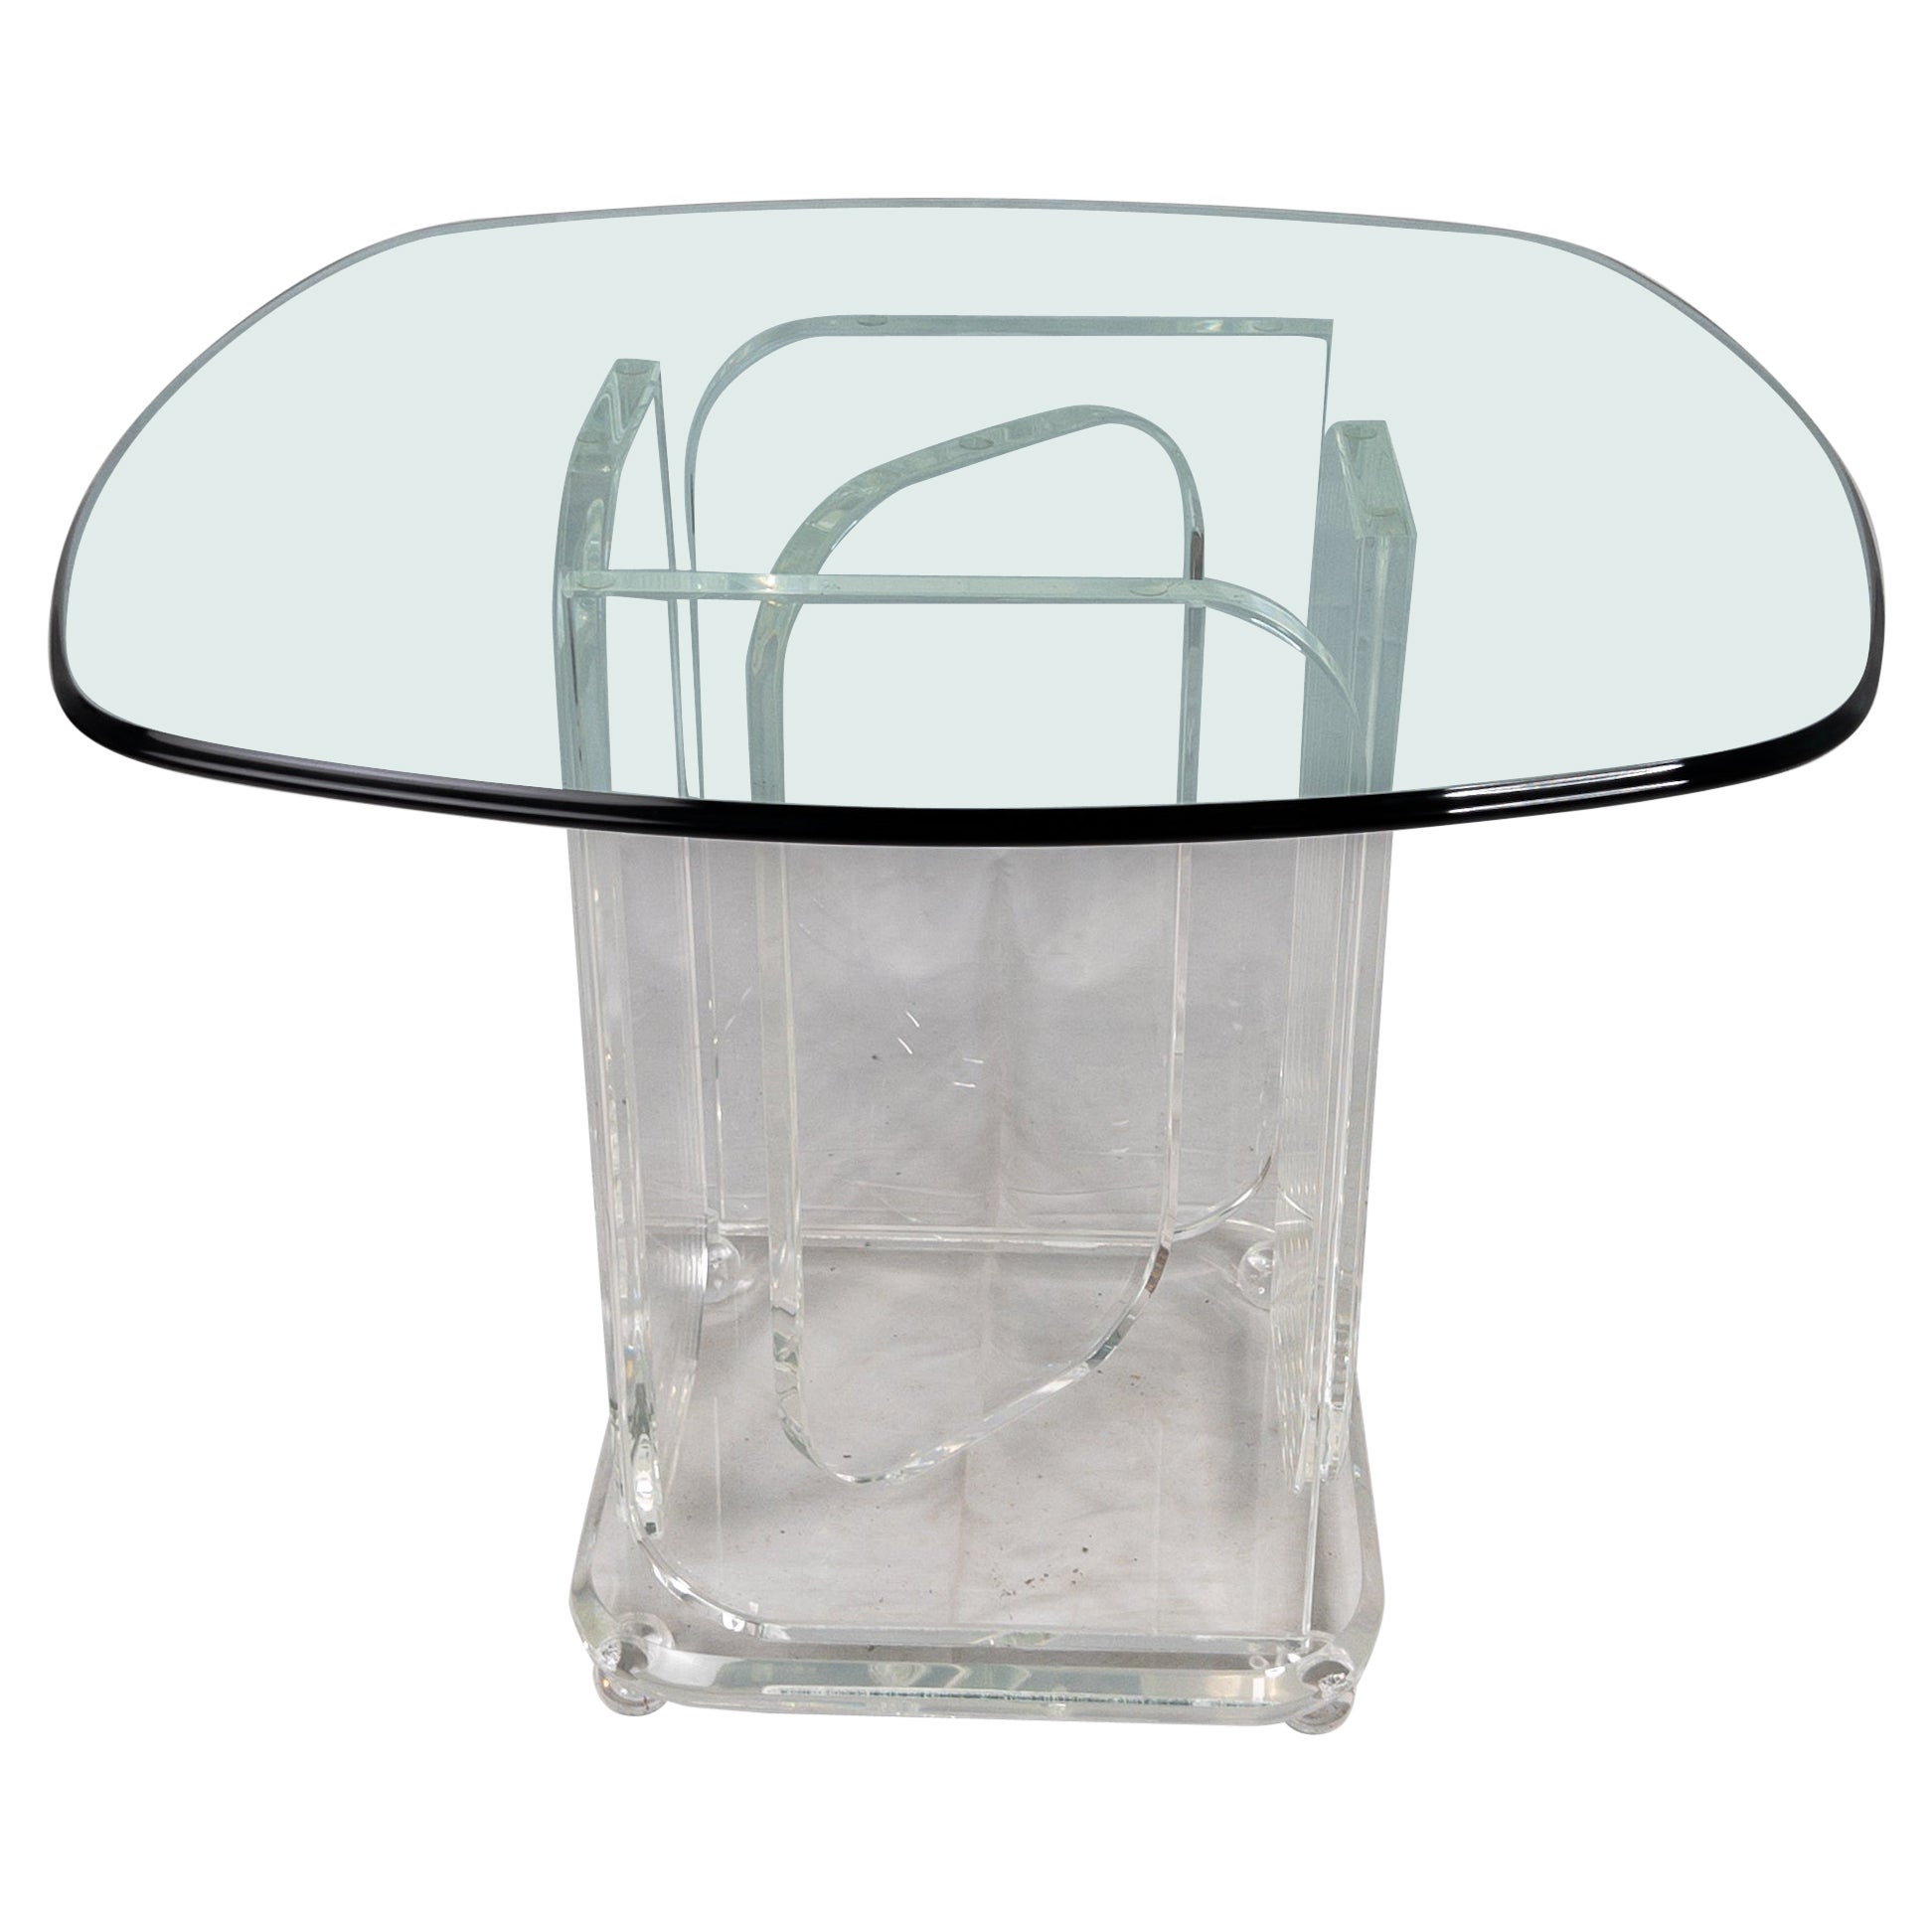 Acrylic & Glass Side/Dining Table